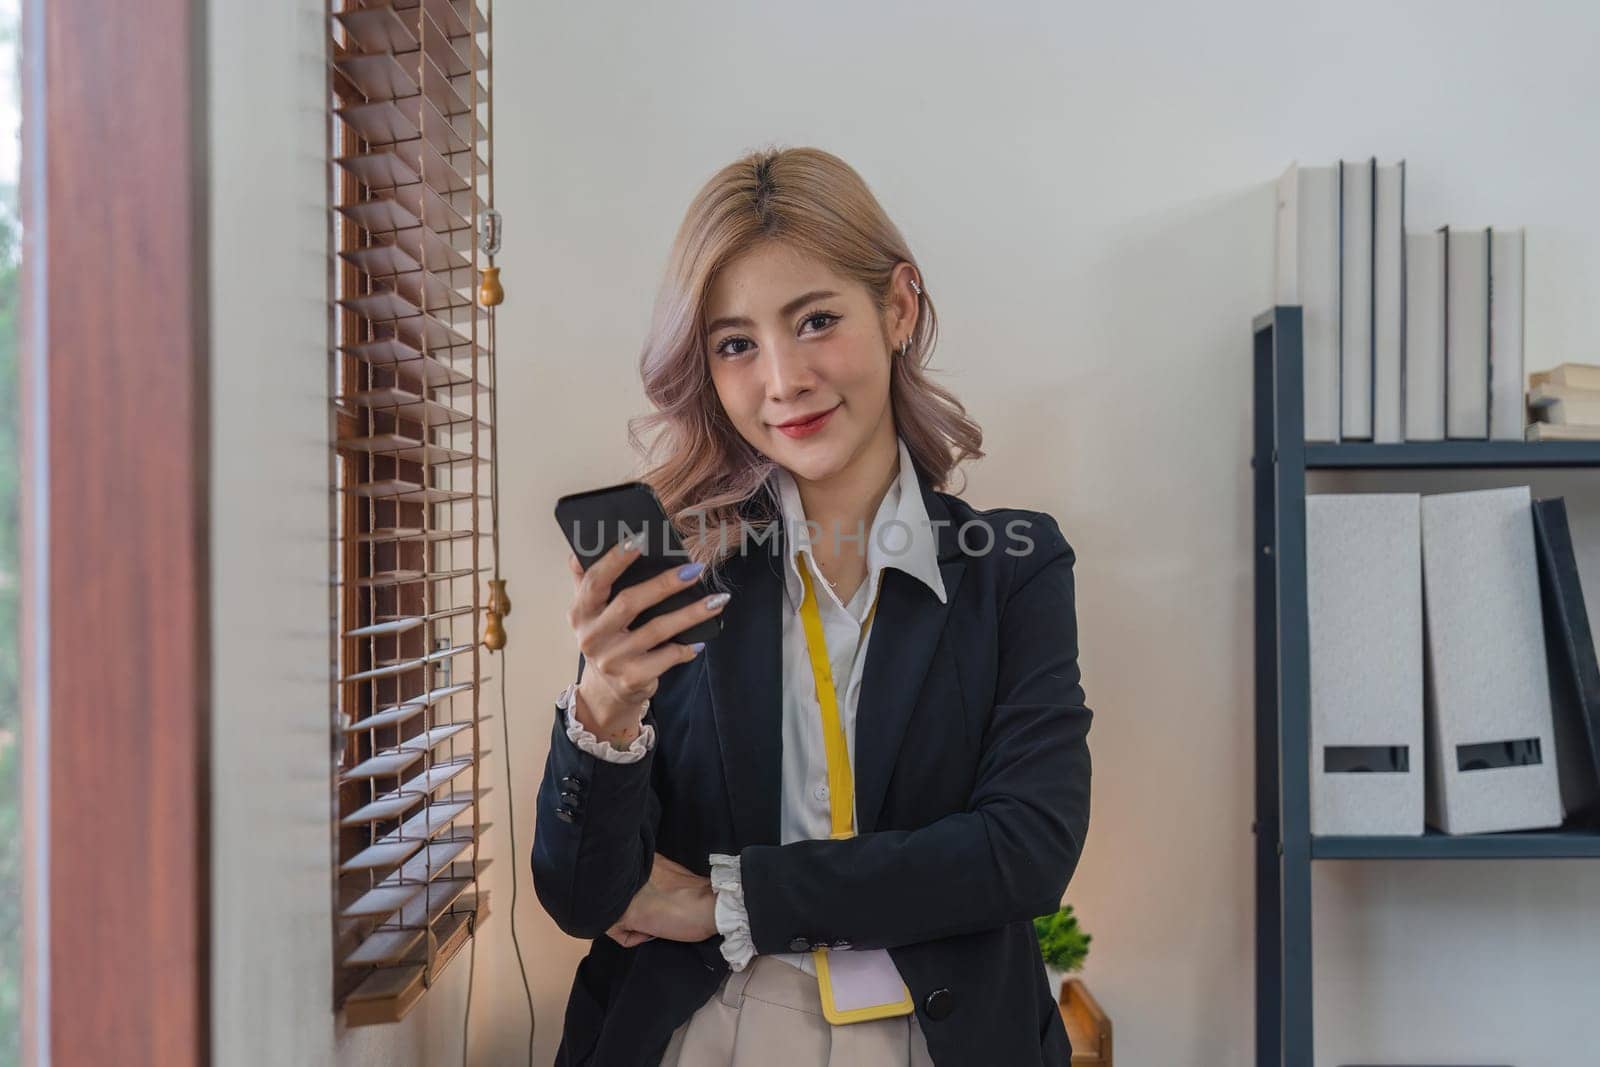 Smiling businesswoman using phone in office. business entrepreneur looking at her mobile phone and smiling.